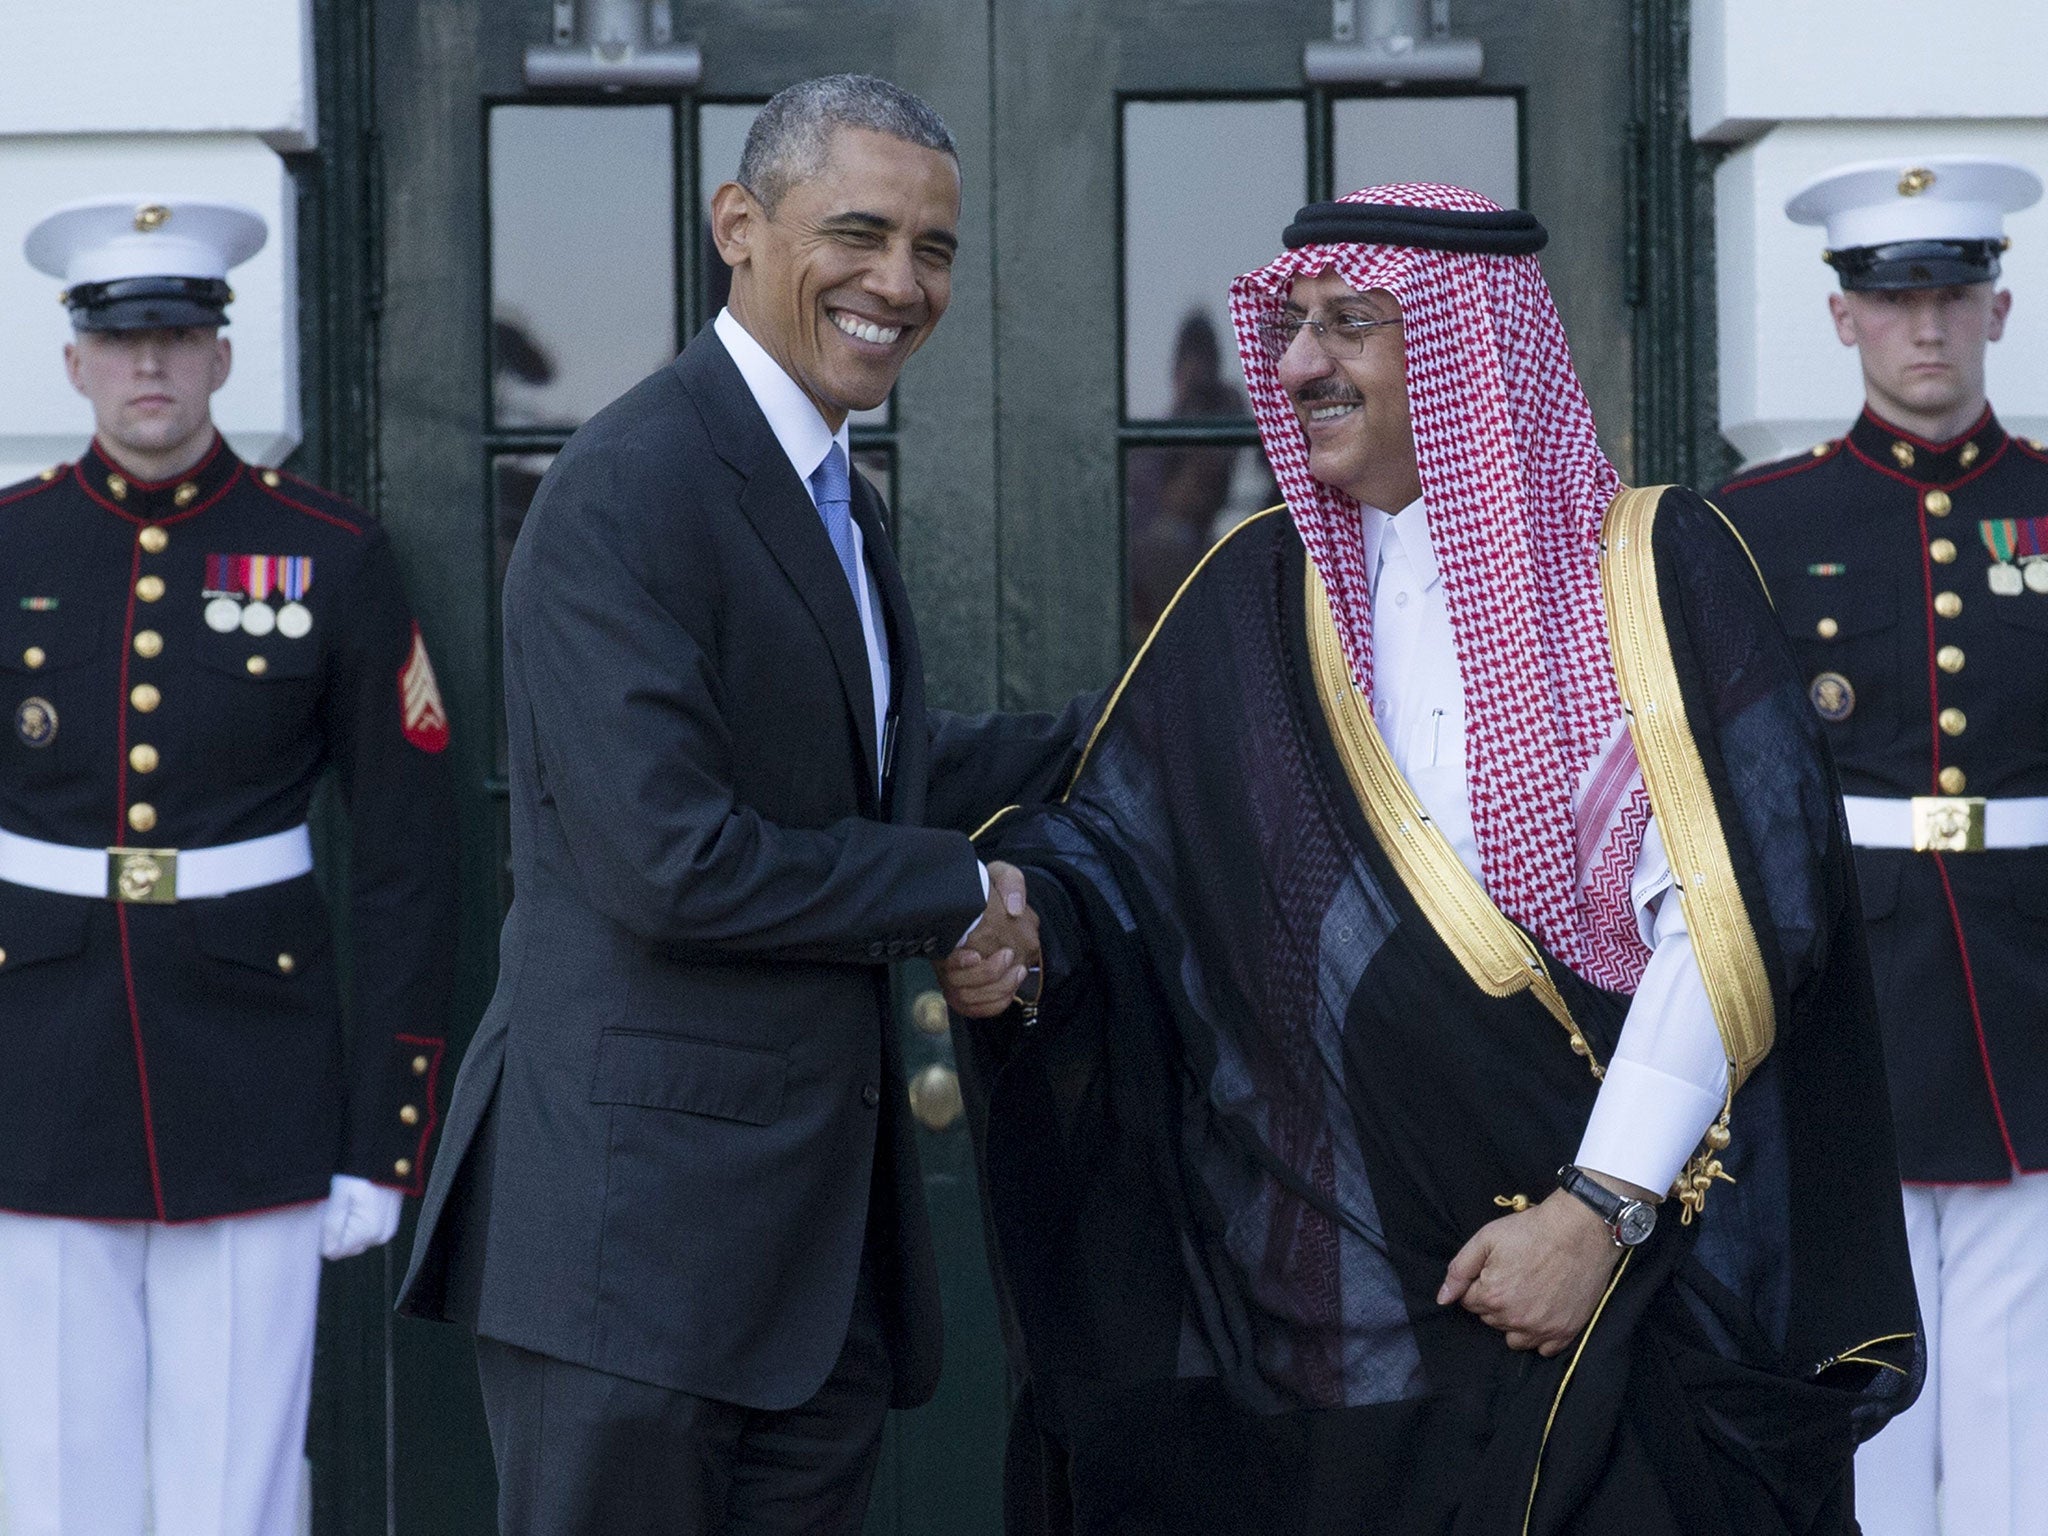 Barack Obama welcomes the Saudi Crown Prince Mohammed bin Nayef at the South Portico of the White House in Washington DC